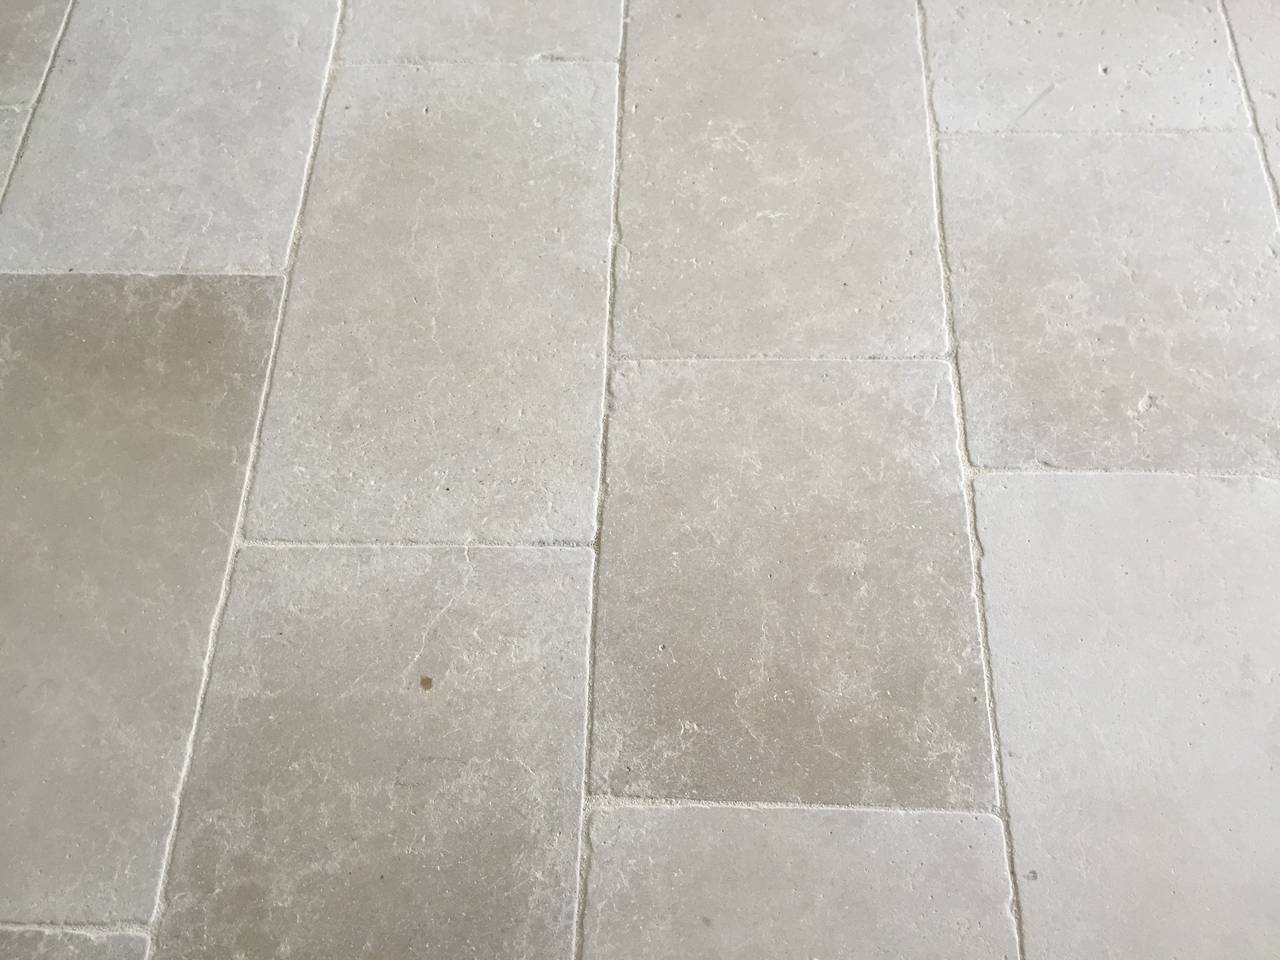 Great quality of pure and solid French limestone flooring, hand-made with antique finishing.
Top of the line quality. All kind of patterns available right now, random, opus roman, etc.
Few thousands square feet available now. Price is per square